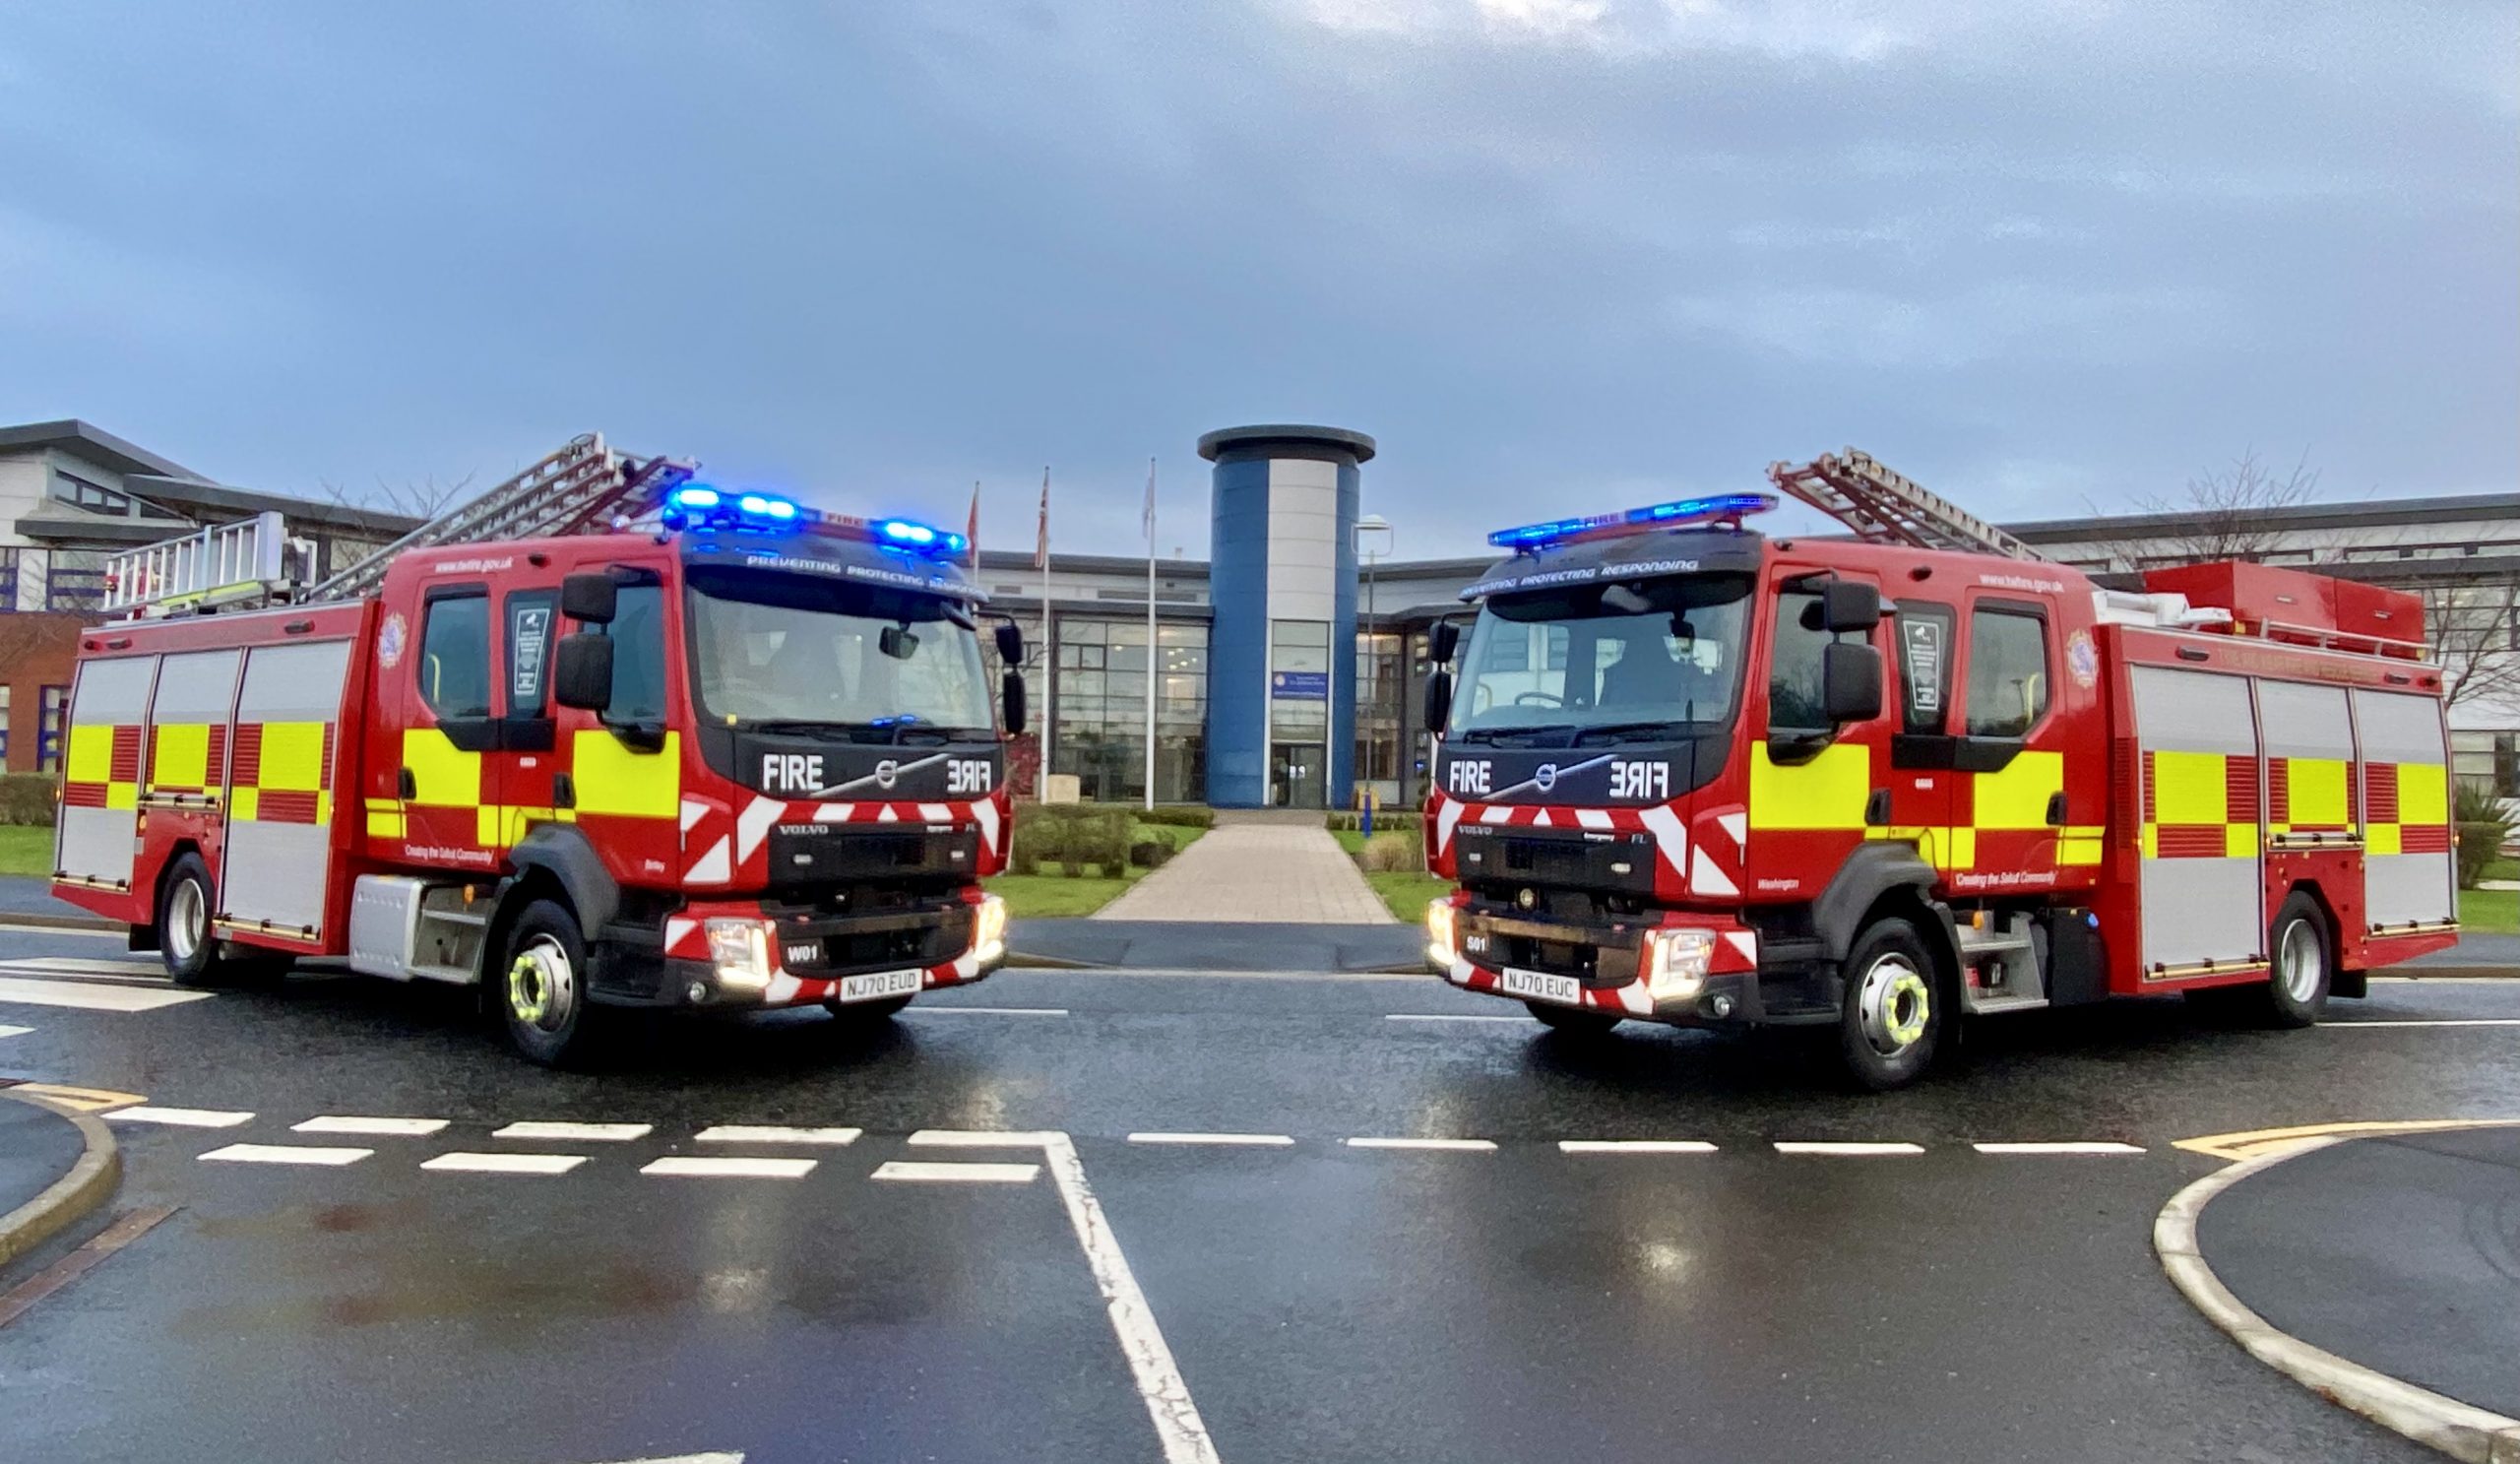 https://www.twfire.gov.uk/wp-content/uploads/2020/12/New-fire-appliances-at-TWFRS-HQ-scaled.jpg